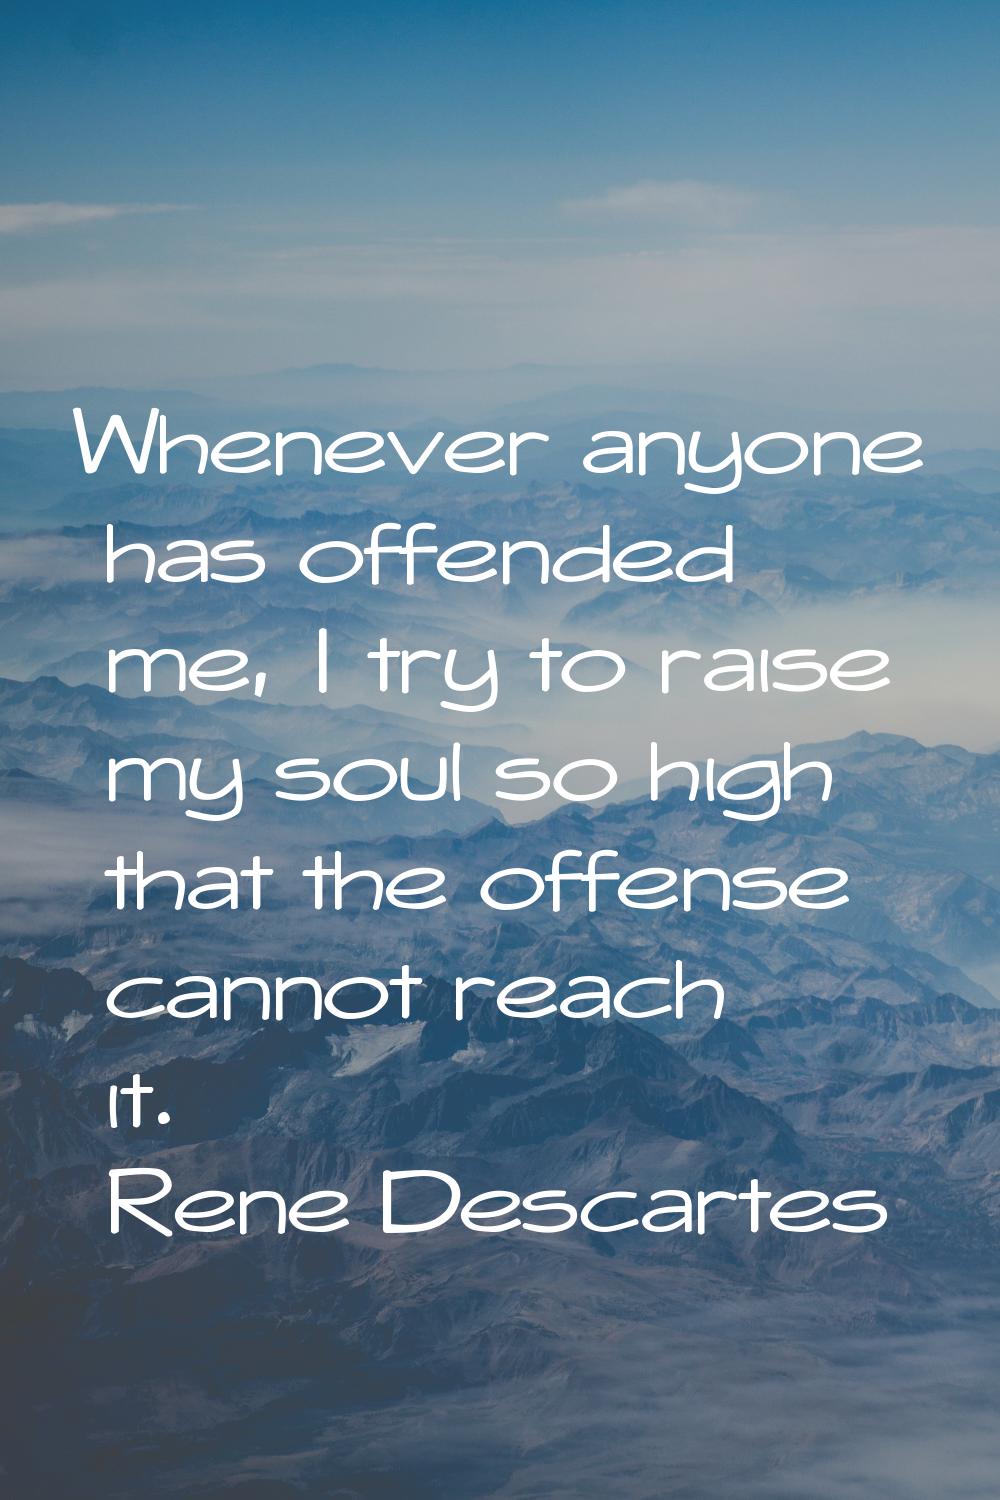 Whenever anyone has offended me, I try to raise my soul so high that the offense cannot reach it.